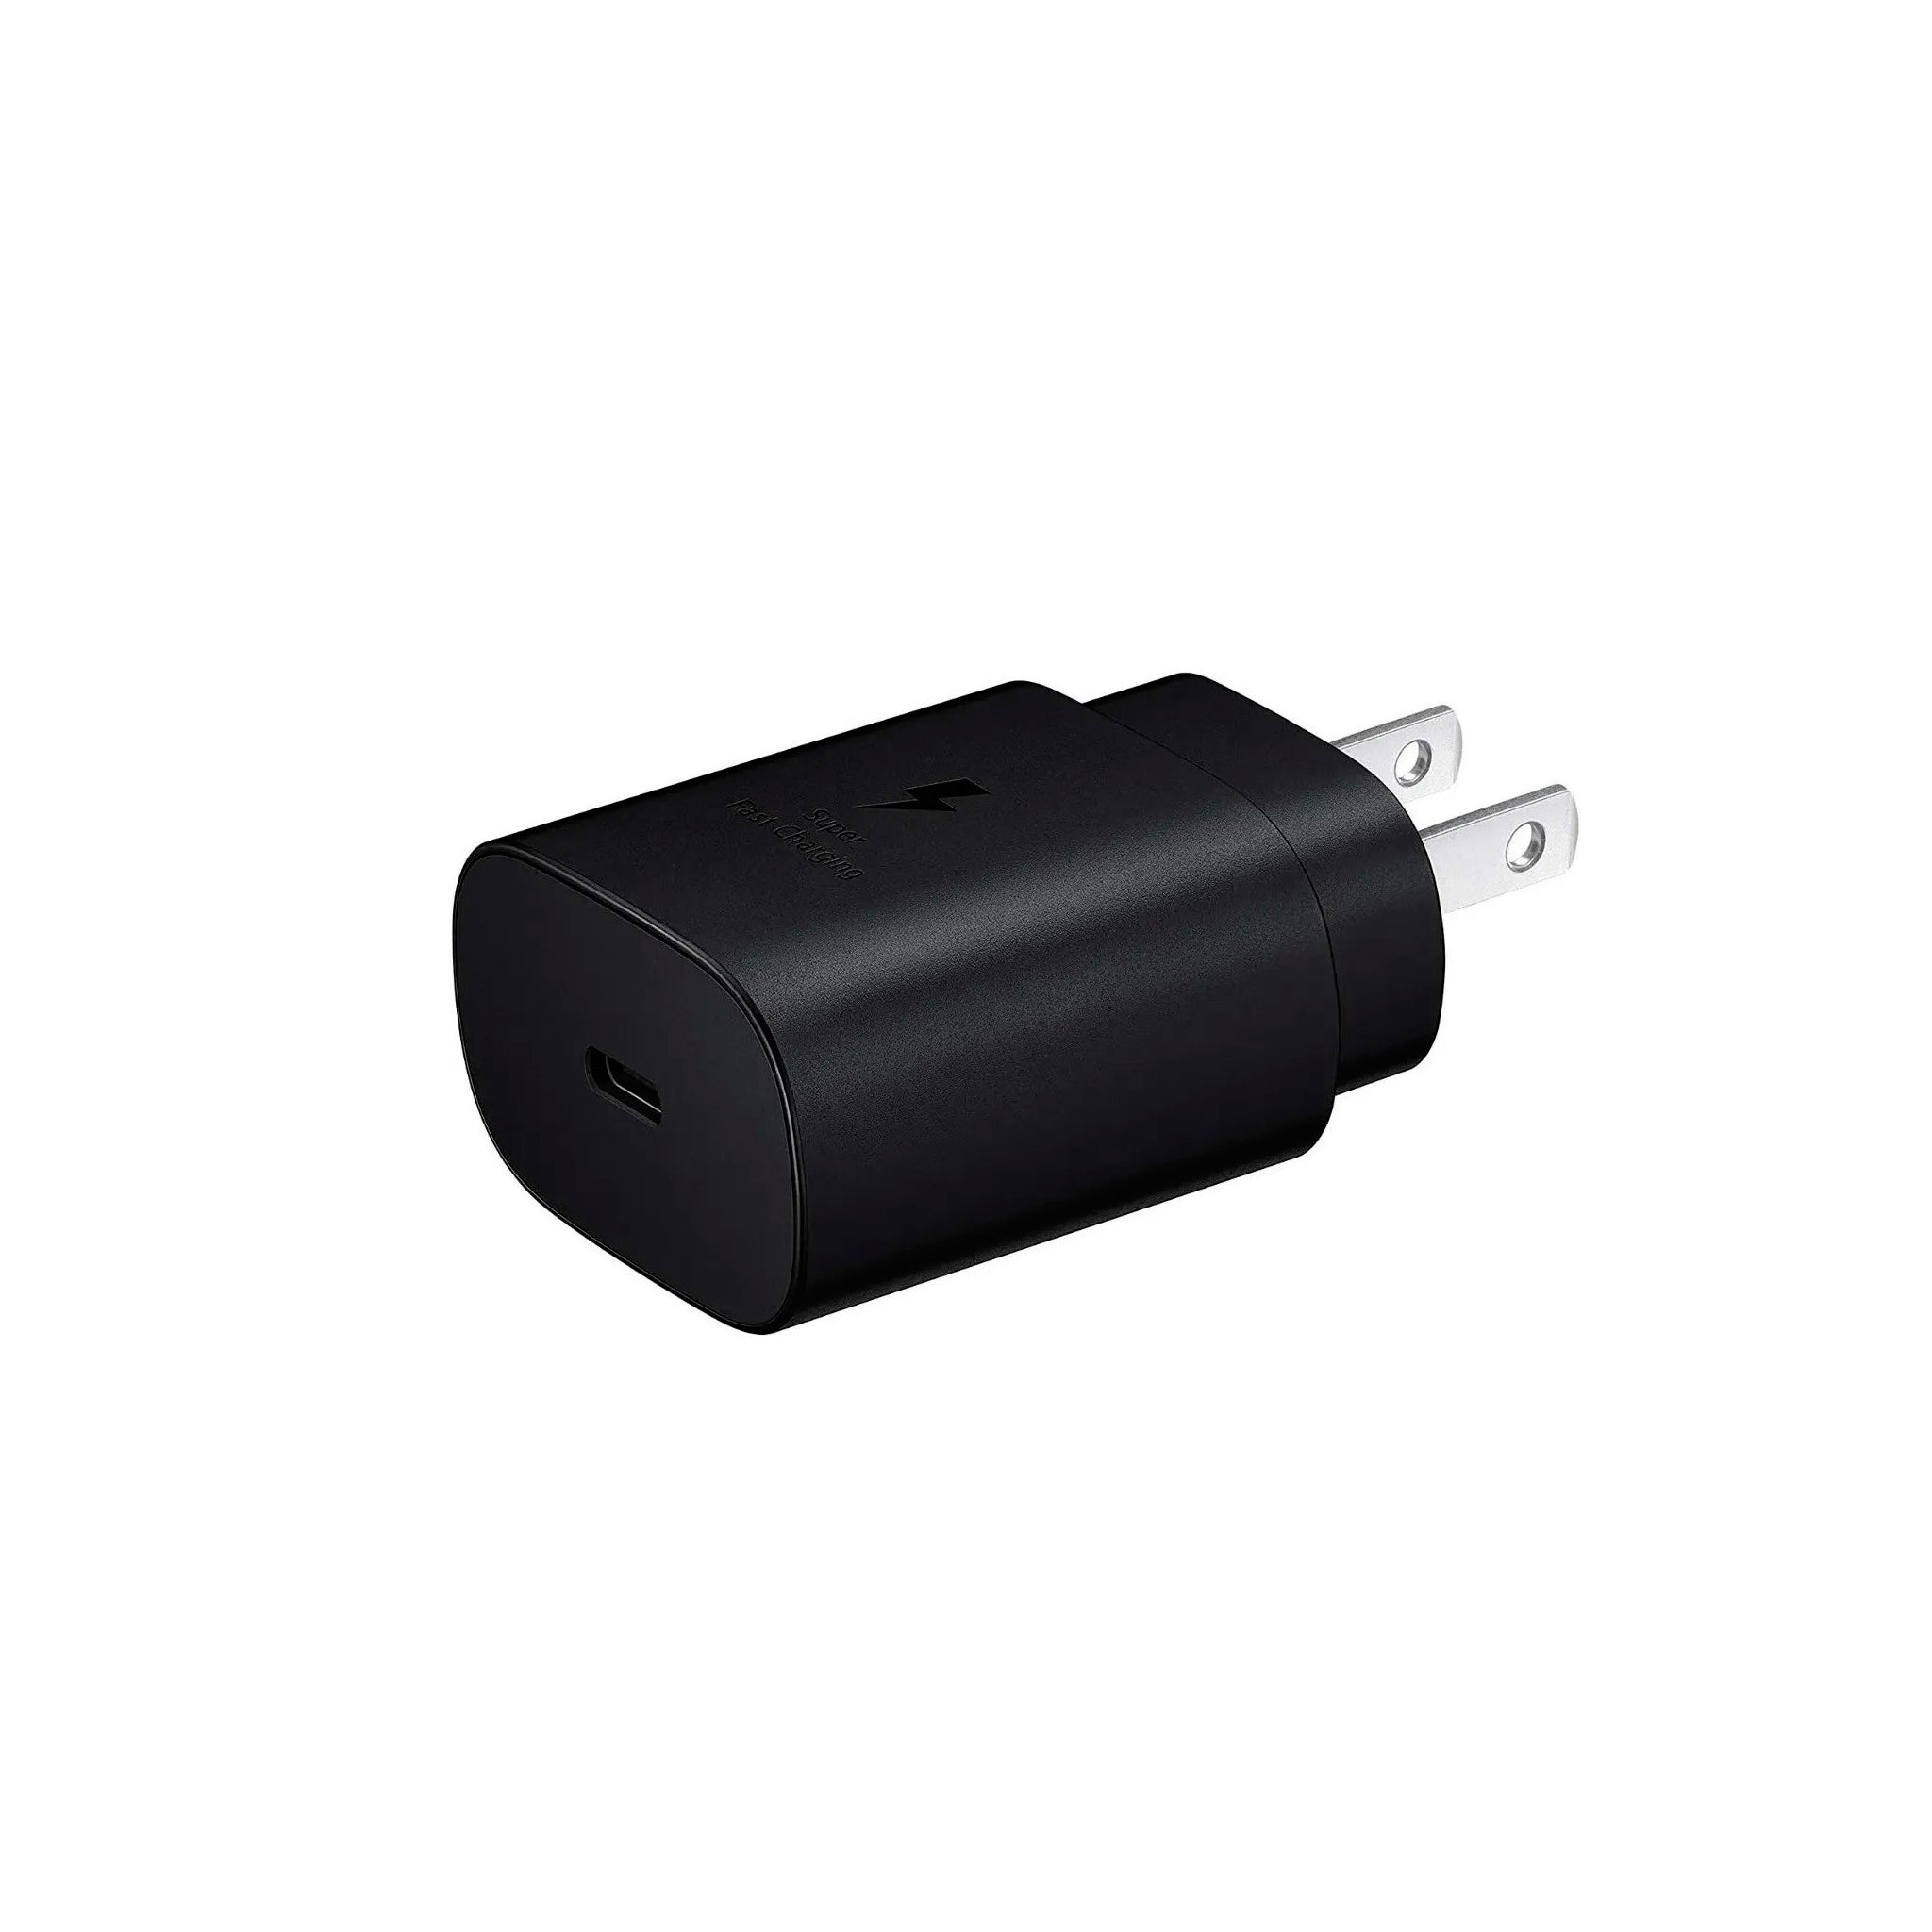 Samsung - Travel Charger 25 Watt Super Fast Charge, 3amp , Type C to Type C Cable Included  -  Black